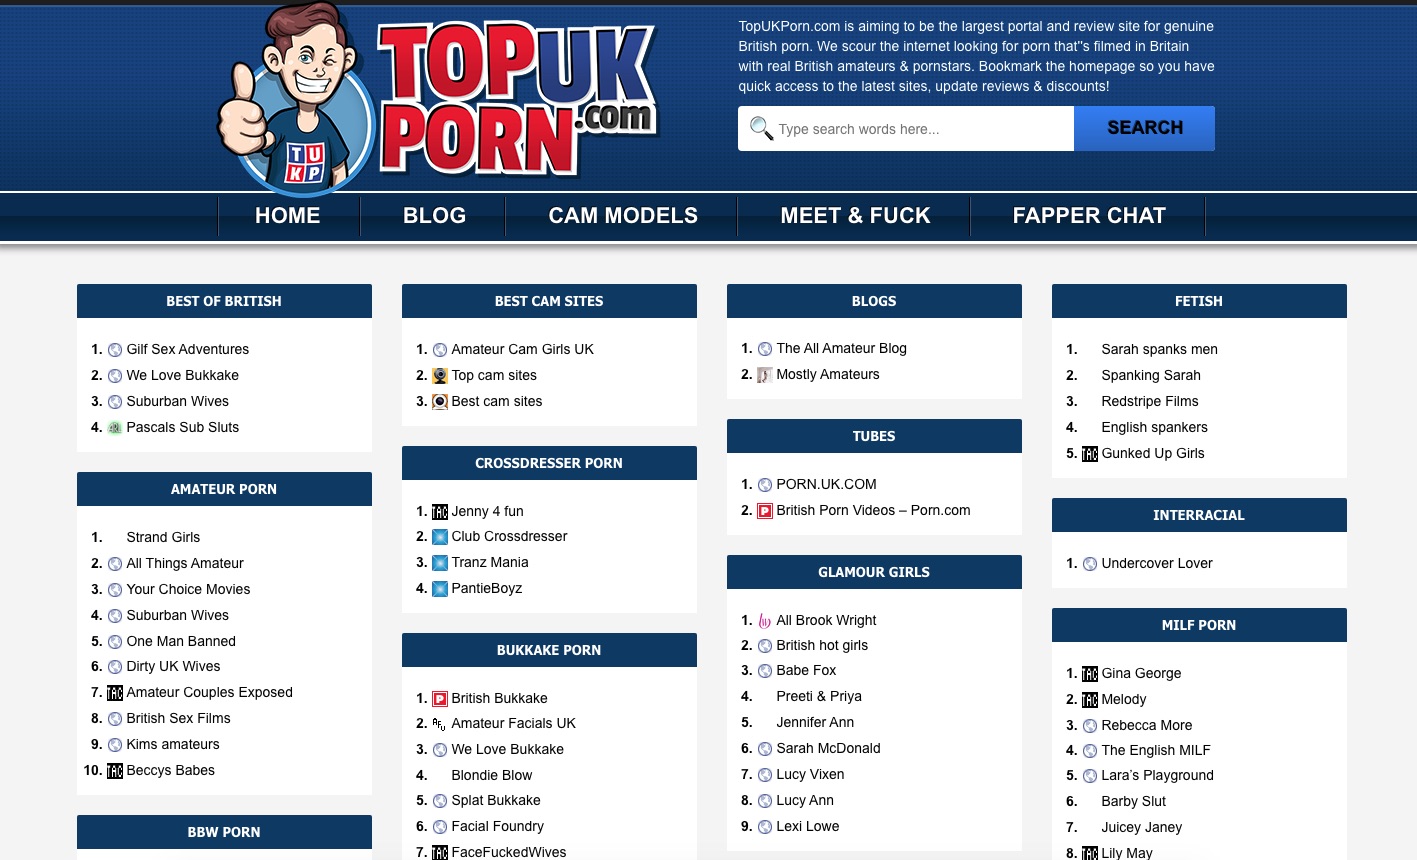 Find the best British porn sites at TopUKPorn.com